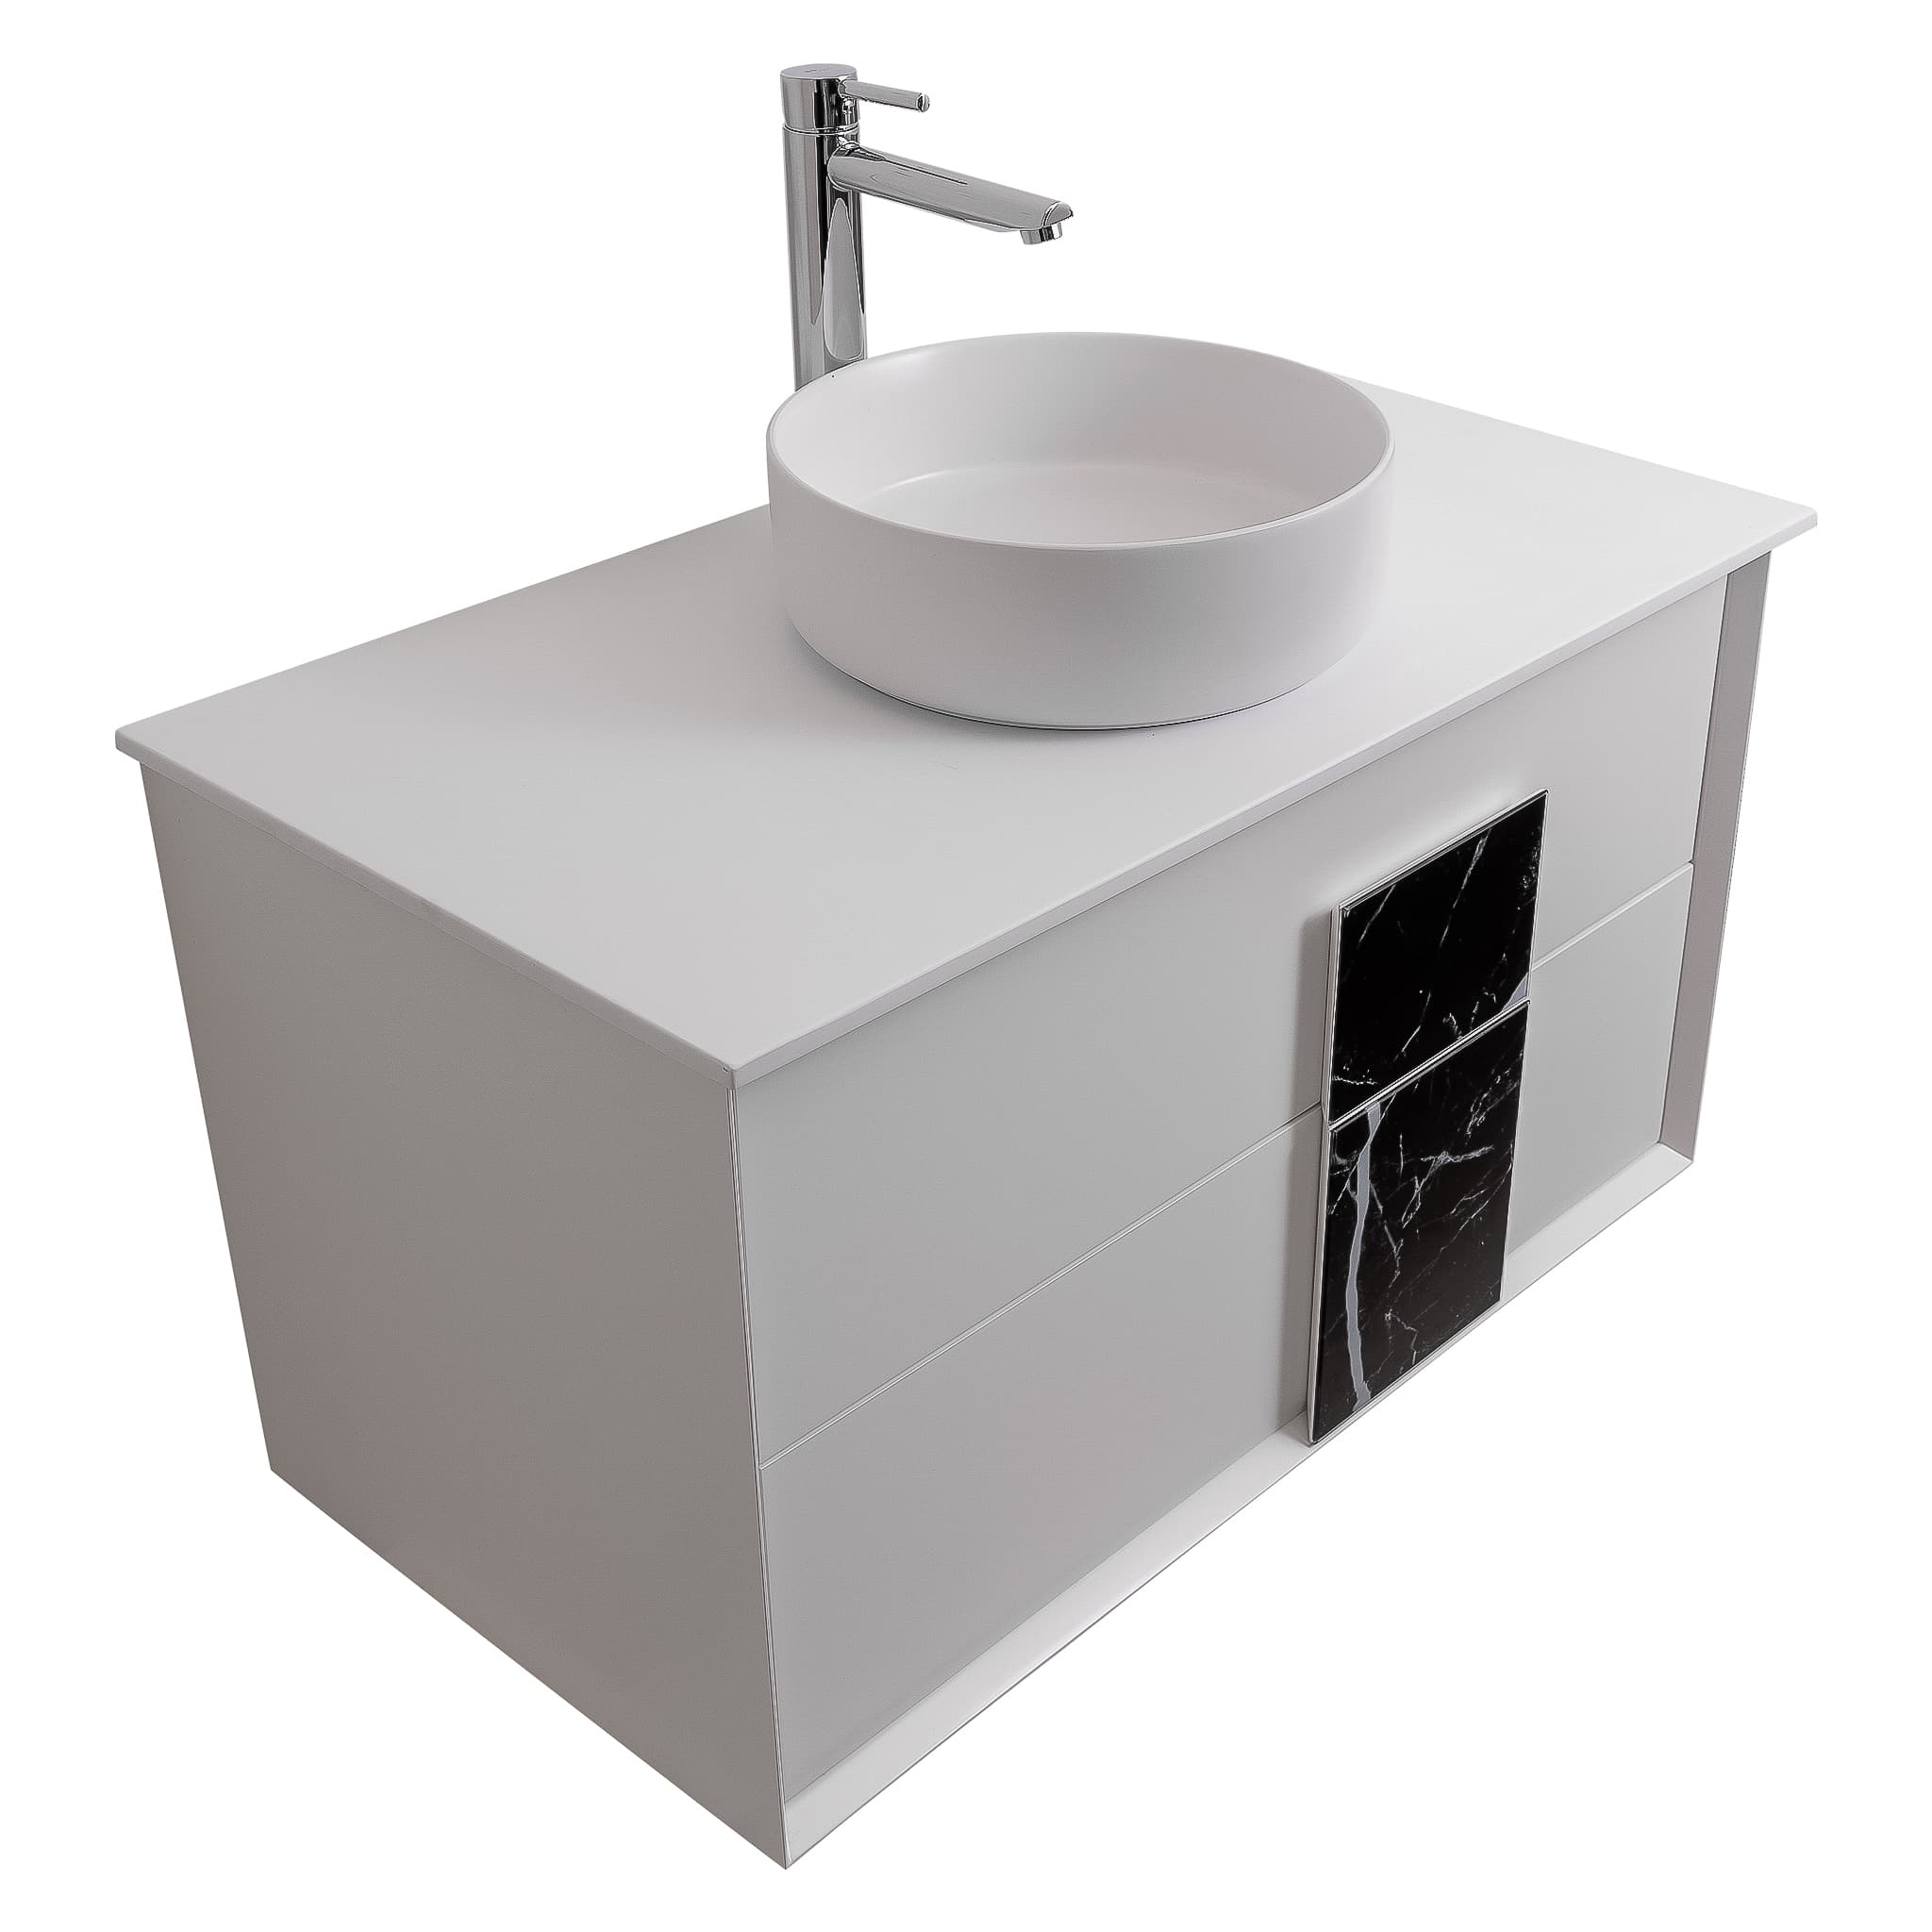 Piazza 31.5 Matte White With Black Marble Handle Cabinet, Ares White Top and Ares White Ceramic Basin, Wall Mounted Modern Vanity Set